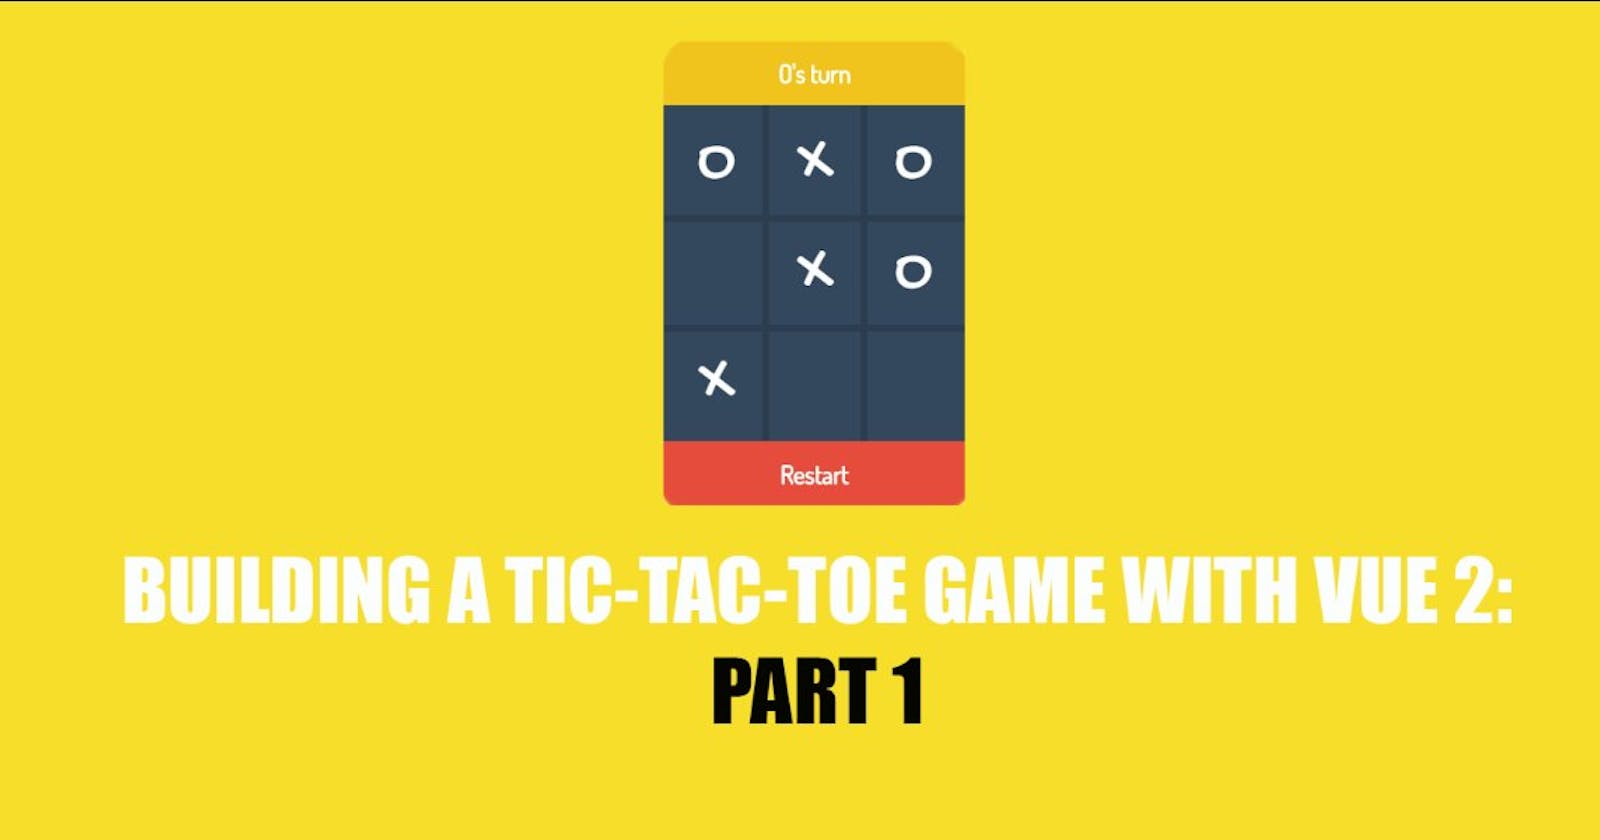 Building a Tic-Tac-Toe Game with Vue 2: Part 1